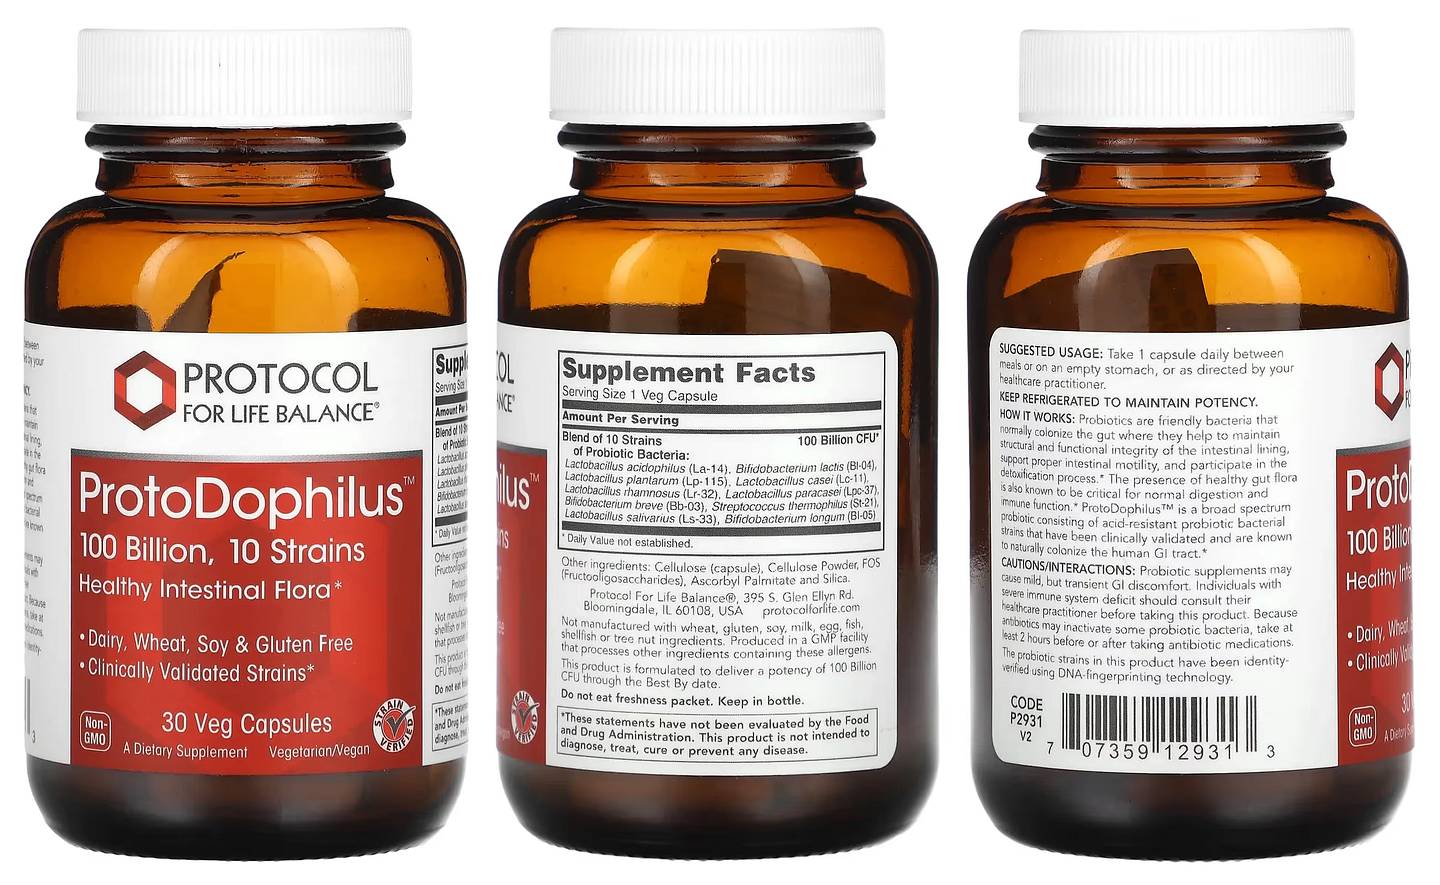 Protocol for Life Balance, ProtoDophilus packaging